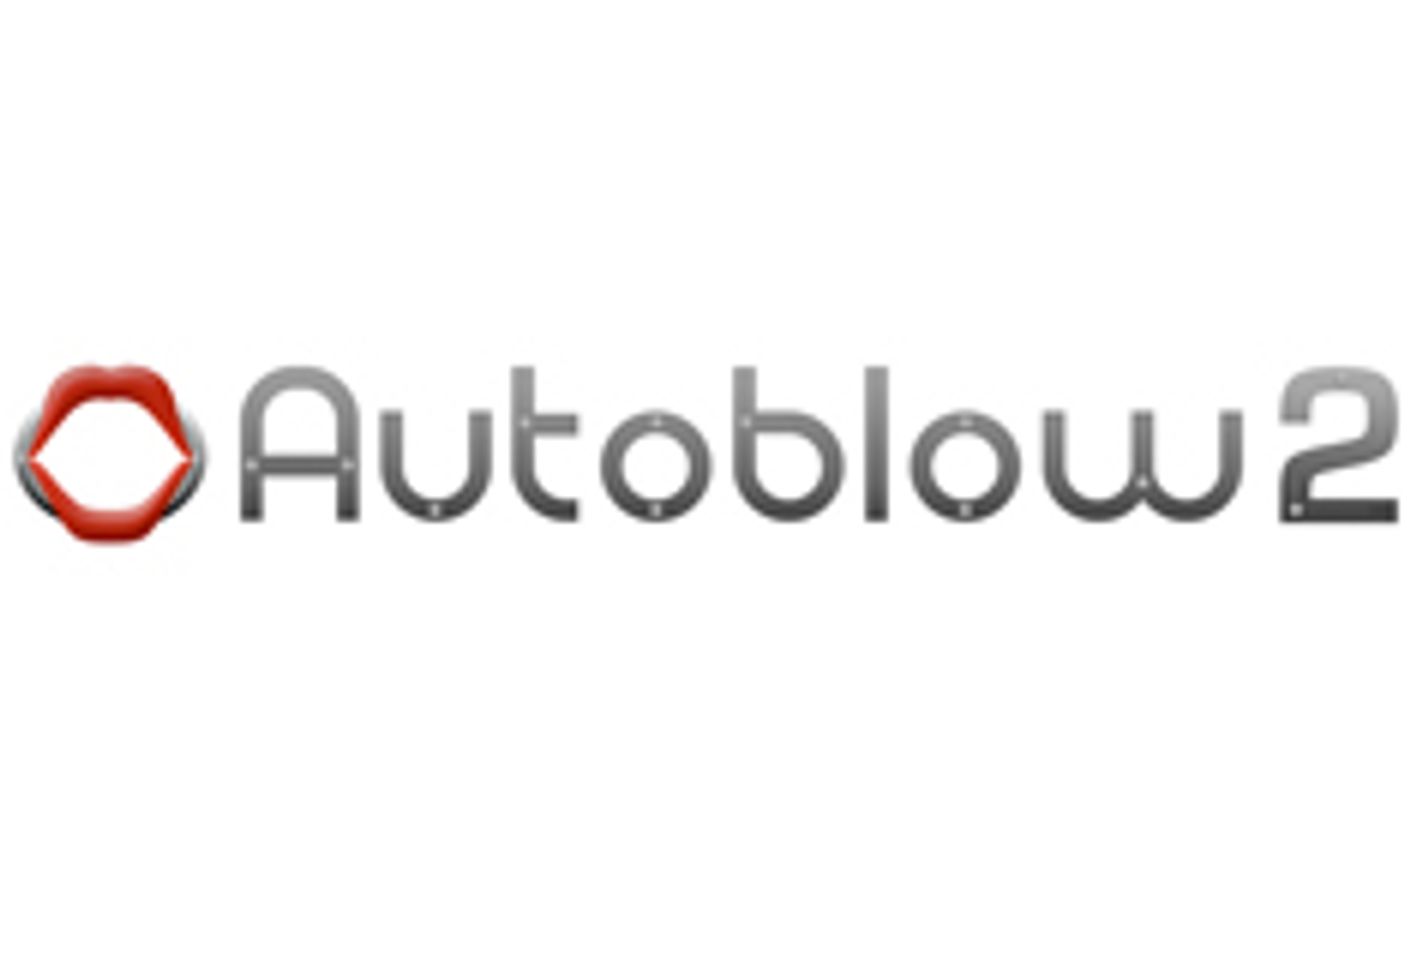 The Autoblow 2 Blowjob Robot Heded To Australia